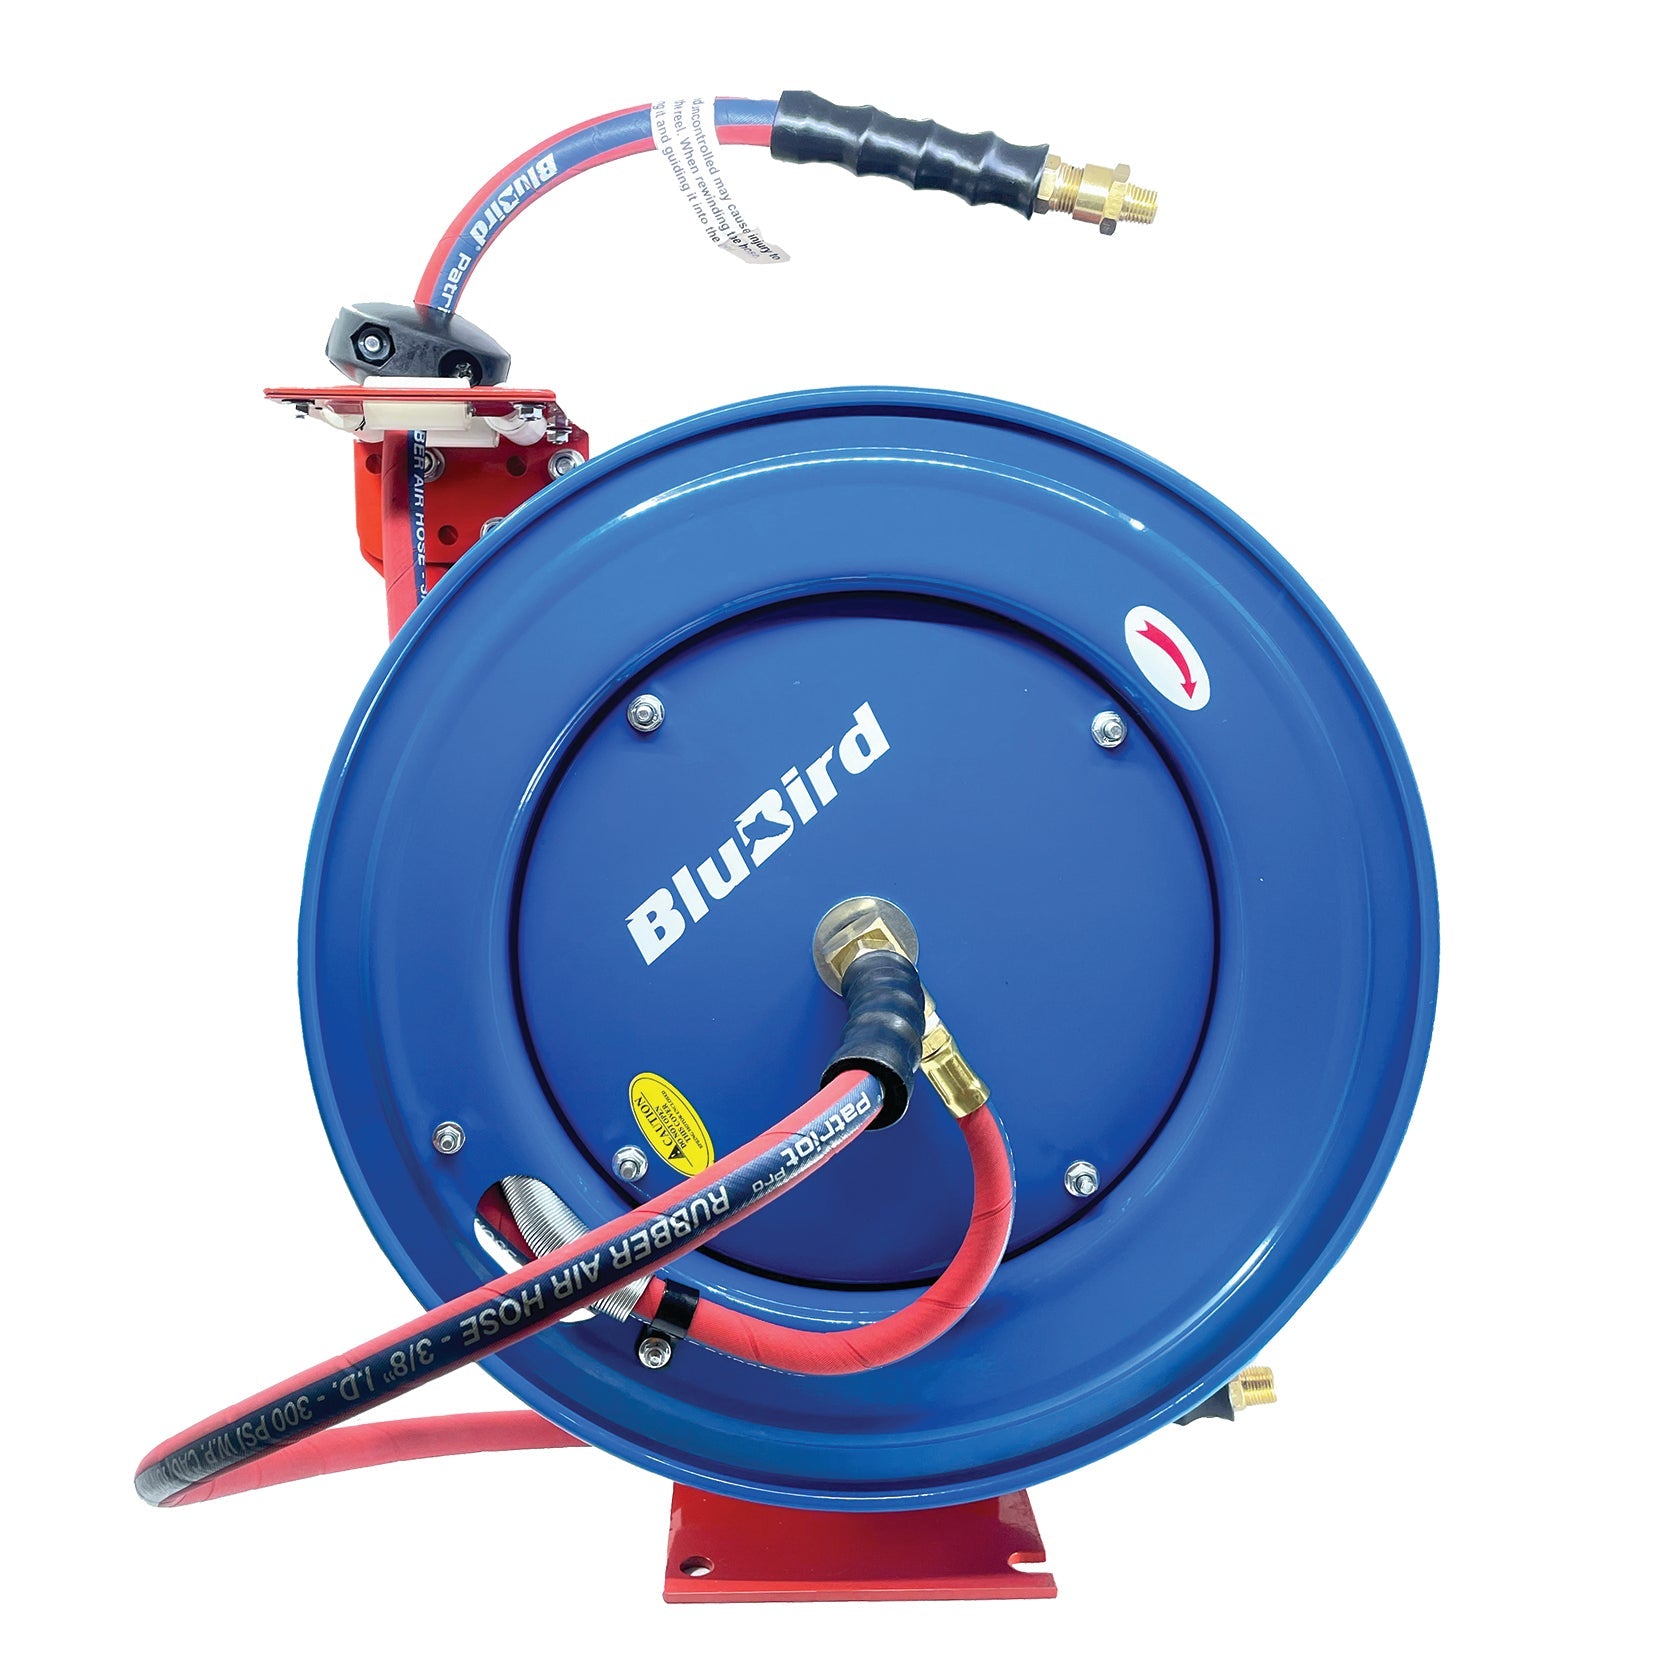 BluBird Patriot Pro Air Hose Reel 3/8" x 50' Retractable Heavy Duty Steel Construction with Rubber Hose 300 PSI